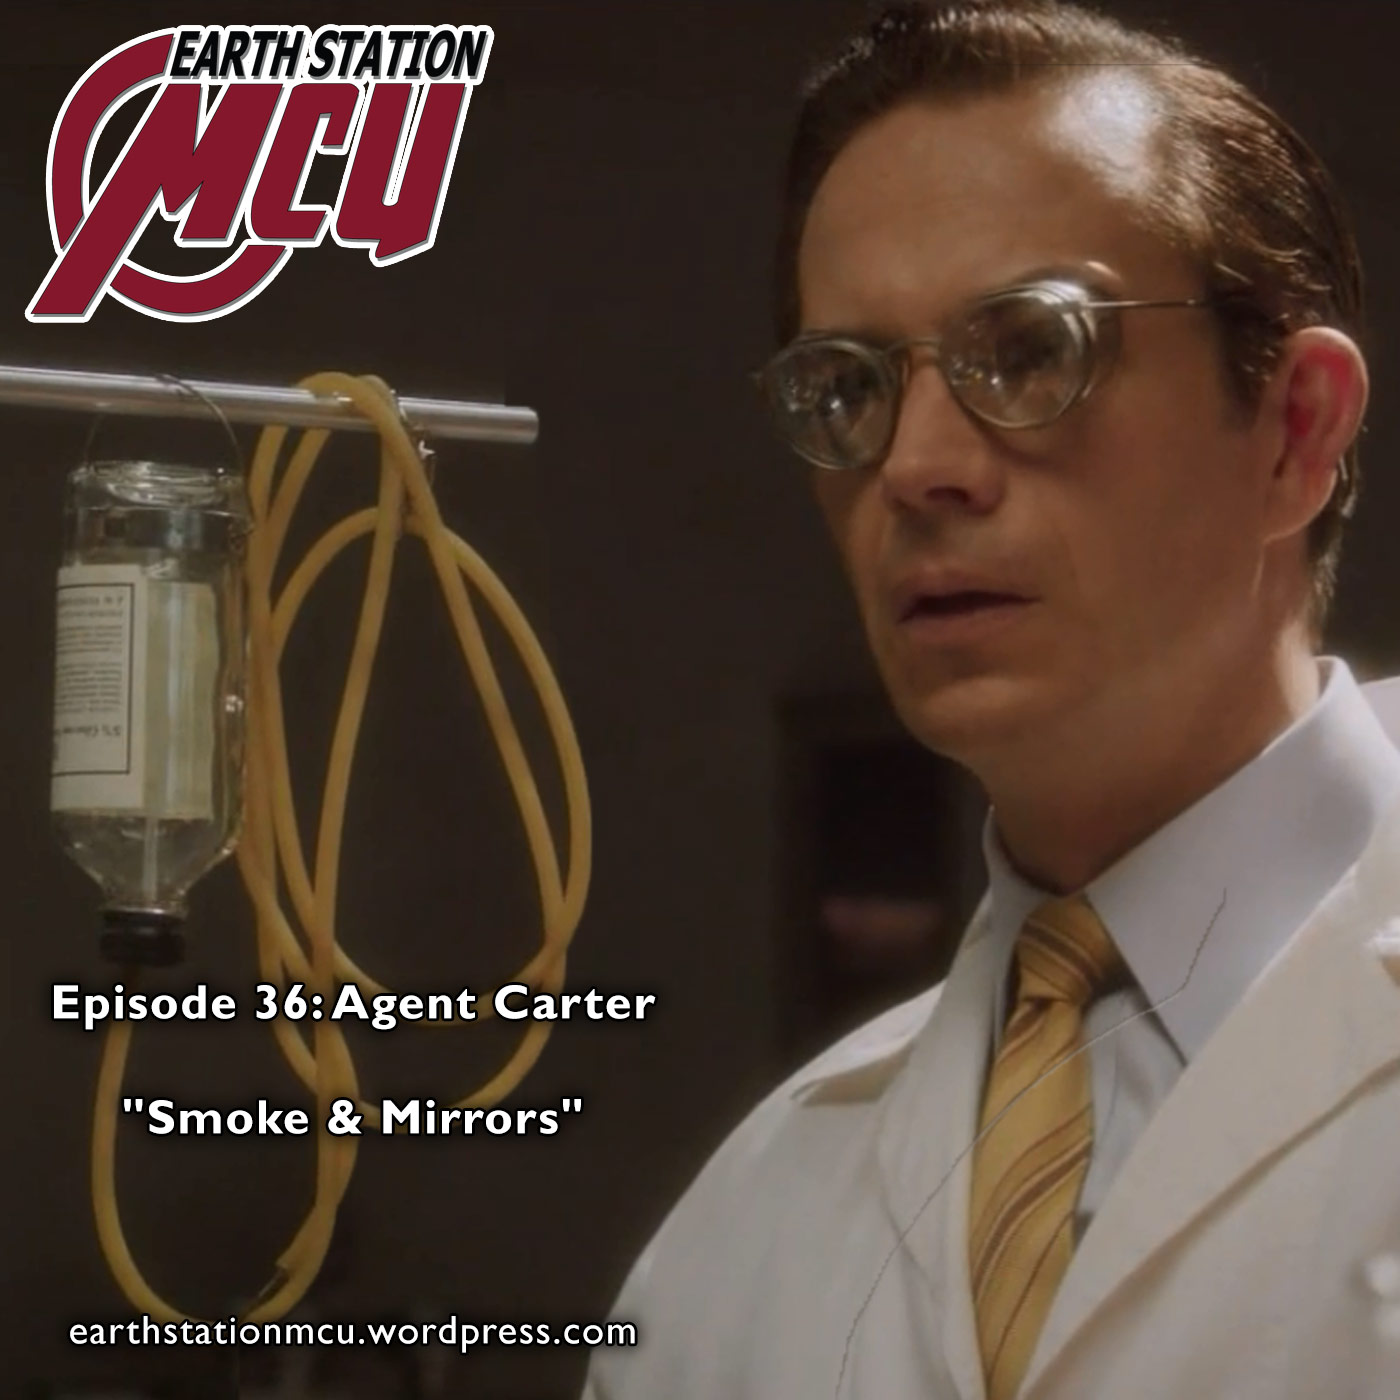 Earth Station MCU Episode 36: Agent Carter, "Smoke and Mirrors"